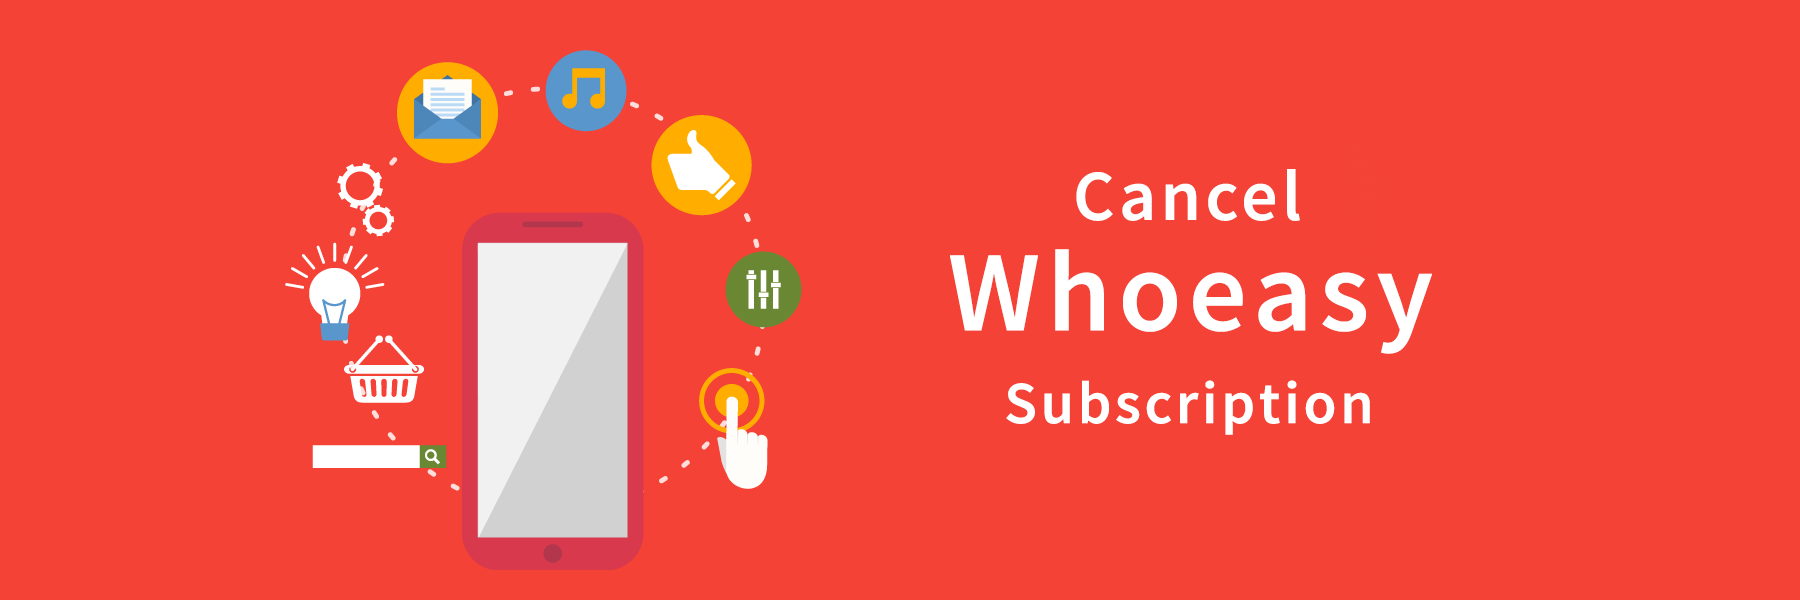 Whoeasy Cancel Subscription